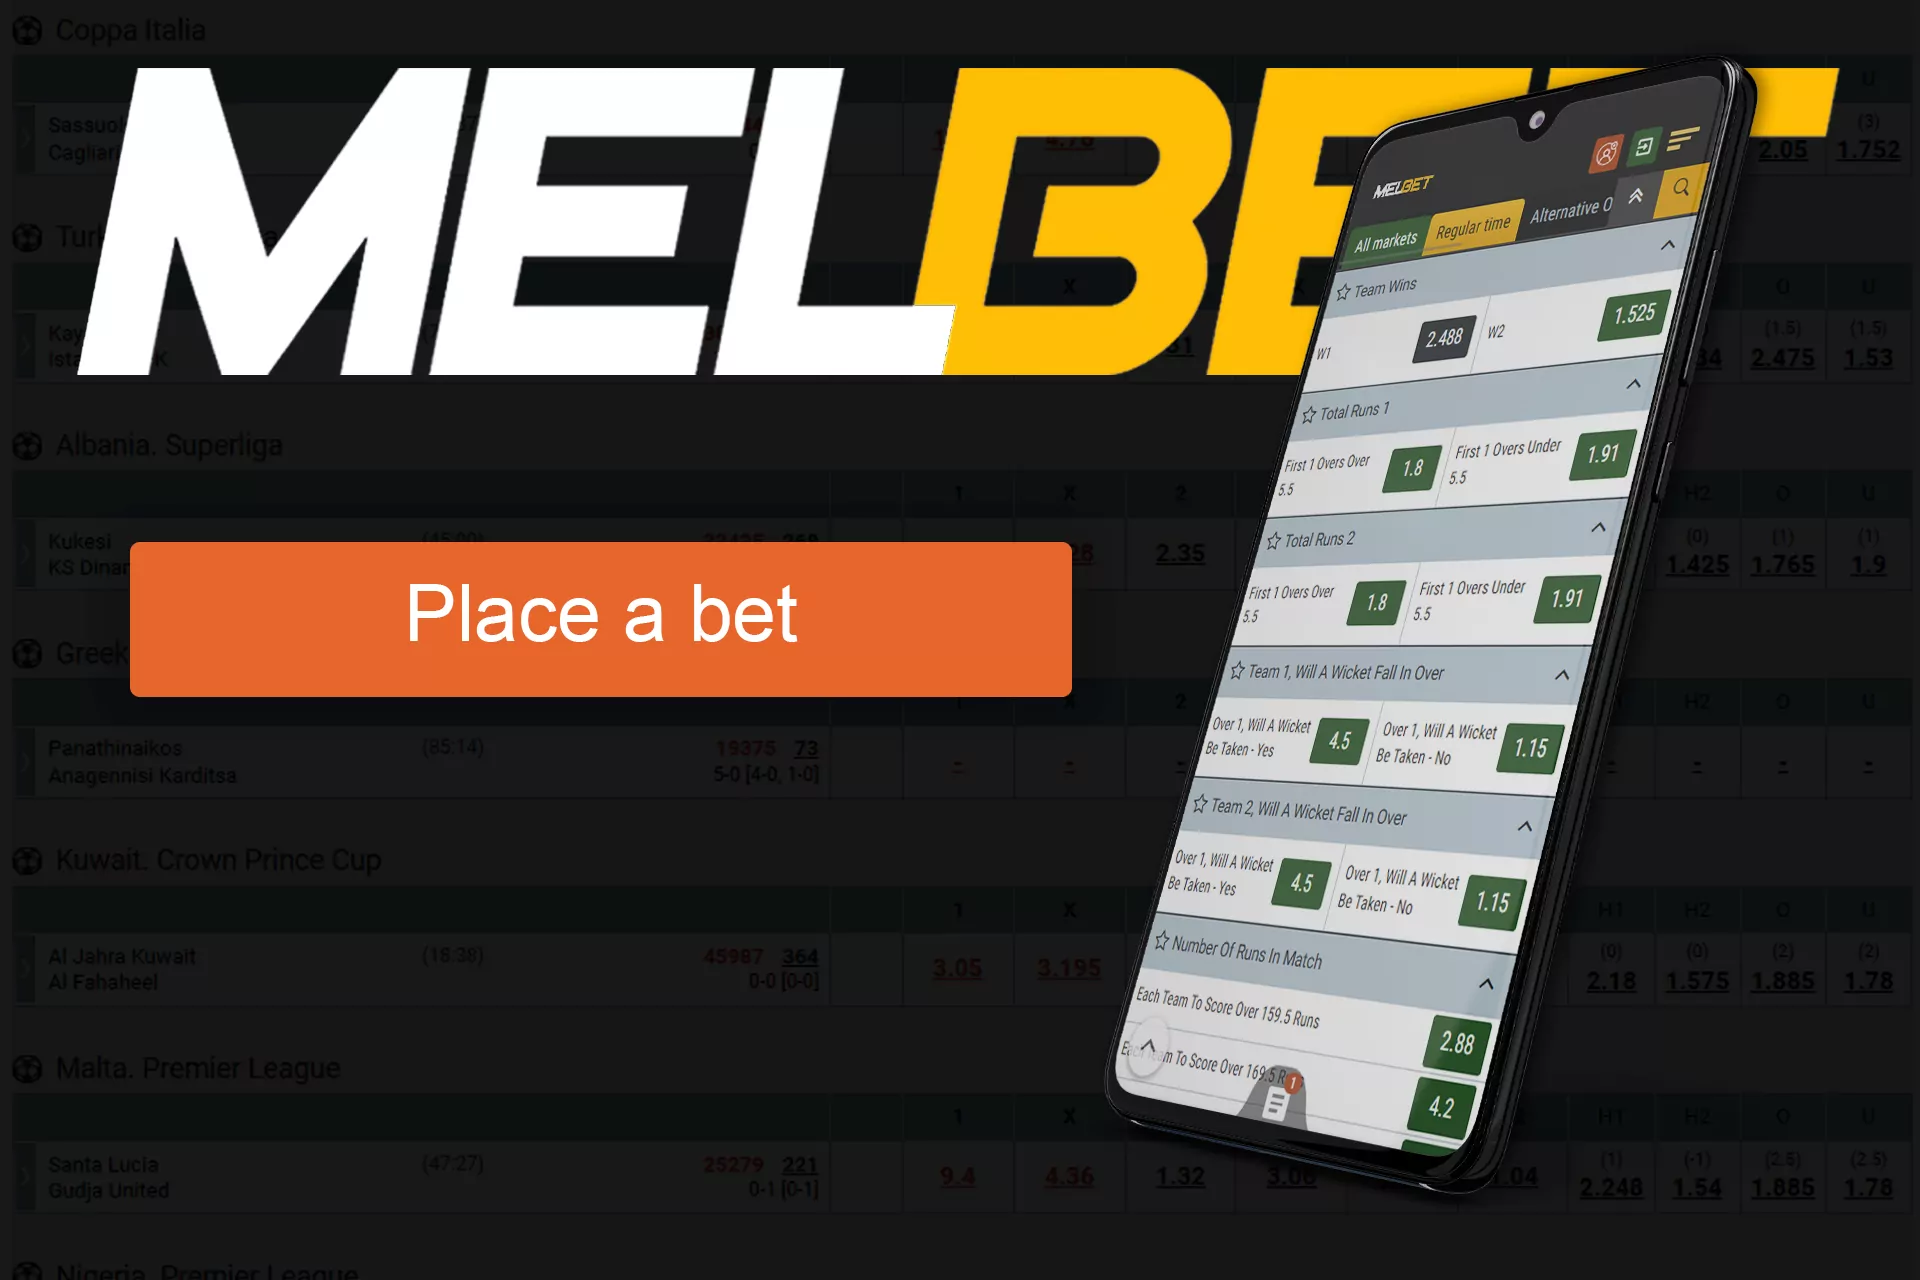 Create an account and choose a sport to place a bet in the Melbet app.